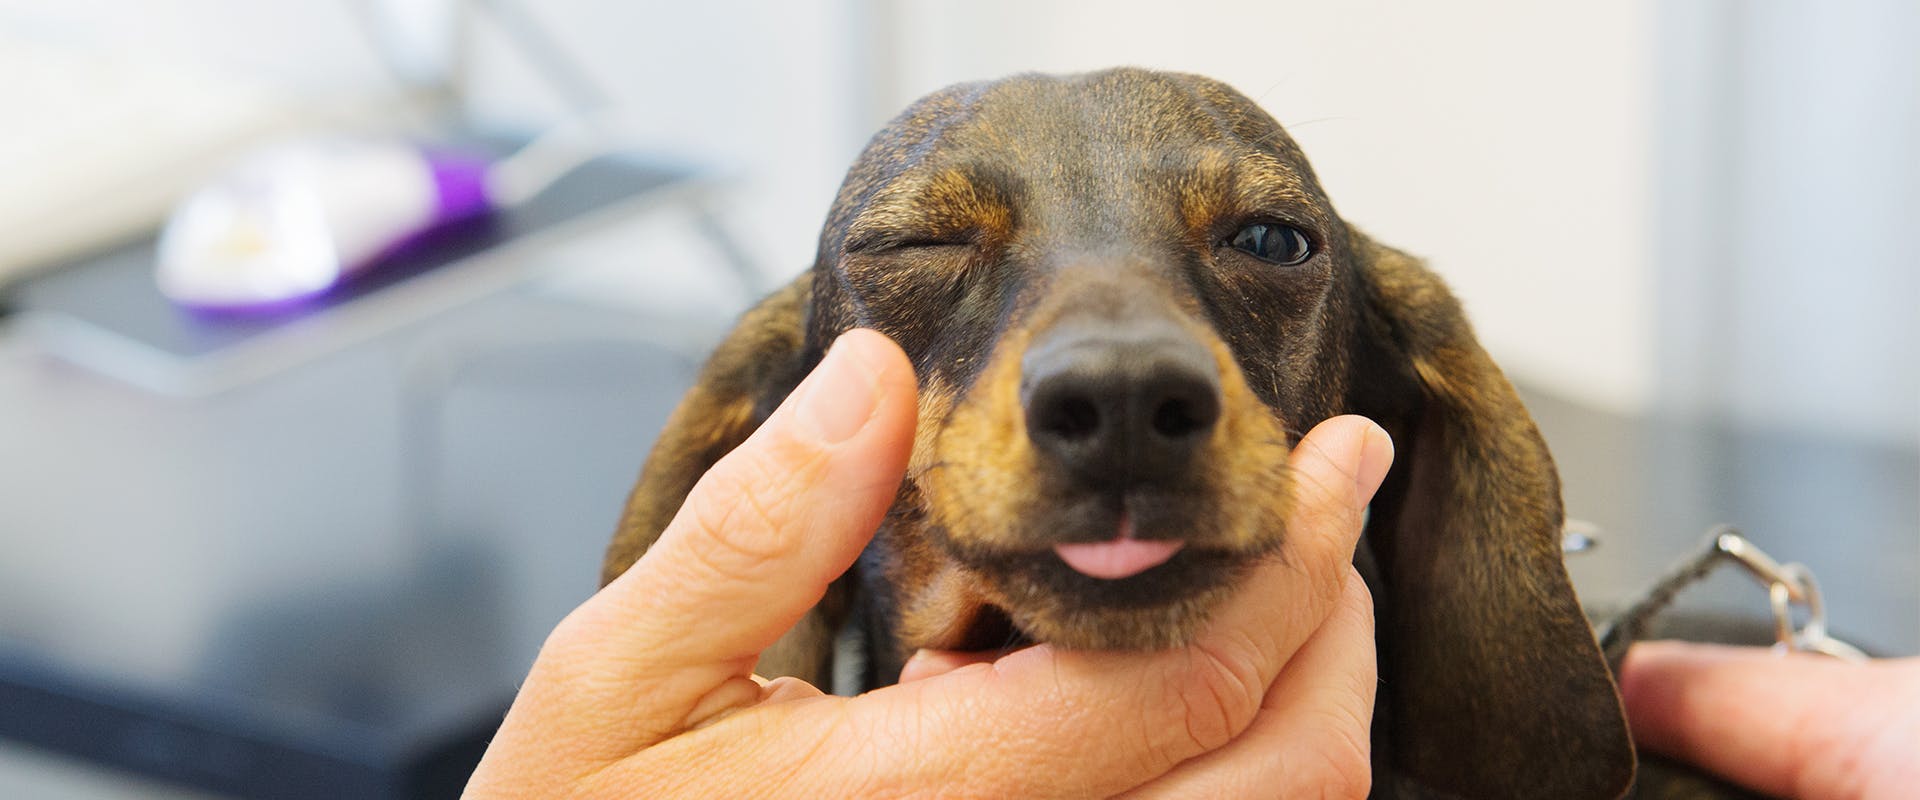 A hand holding a small dachshund's face